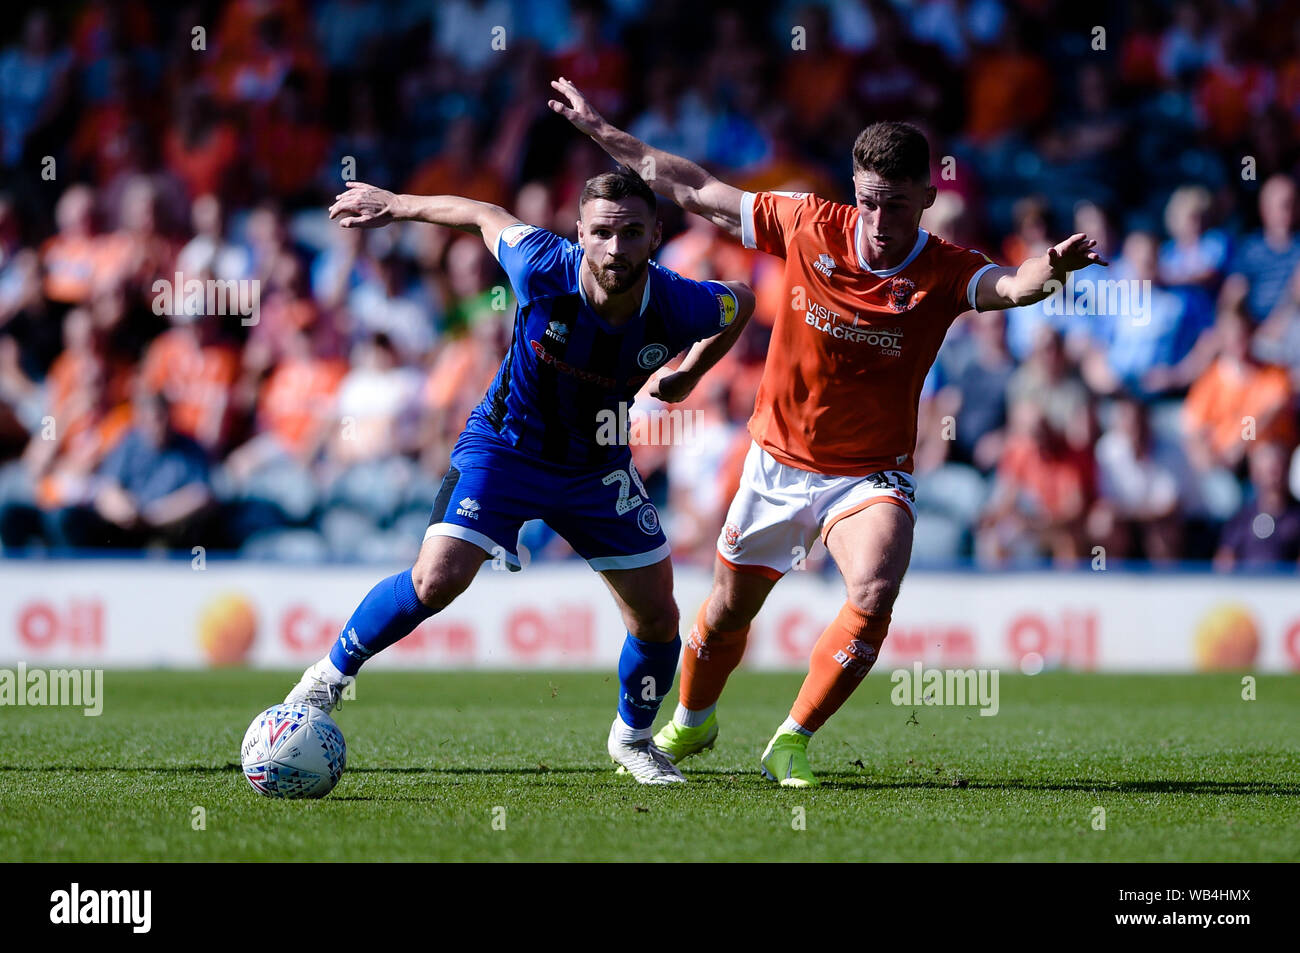 Rochdale, UK. 24th Aug, 2019. Rochdale midfielder Jimmy Ryan and Blackpool  midfielder Jordan Thompson during the Sky Bet League 1 match between  Rochdale and Blackpool at Spotland Stadium, Rochdale on Saturday 24th